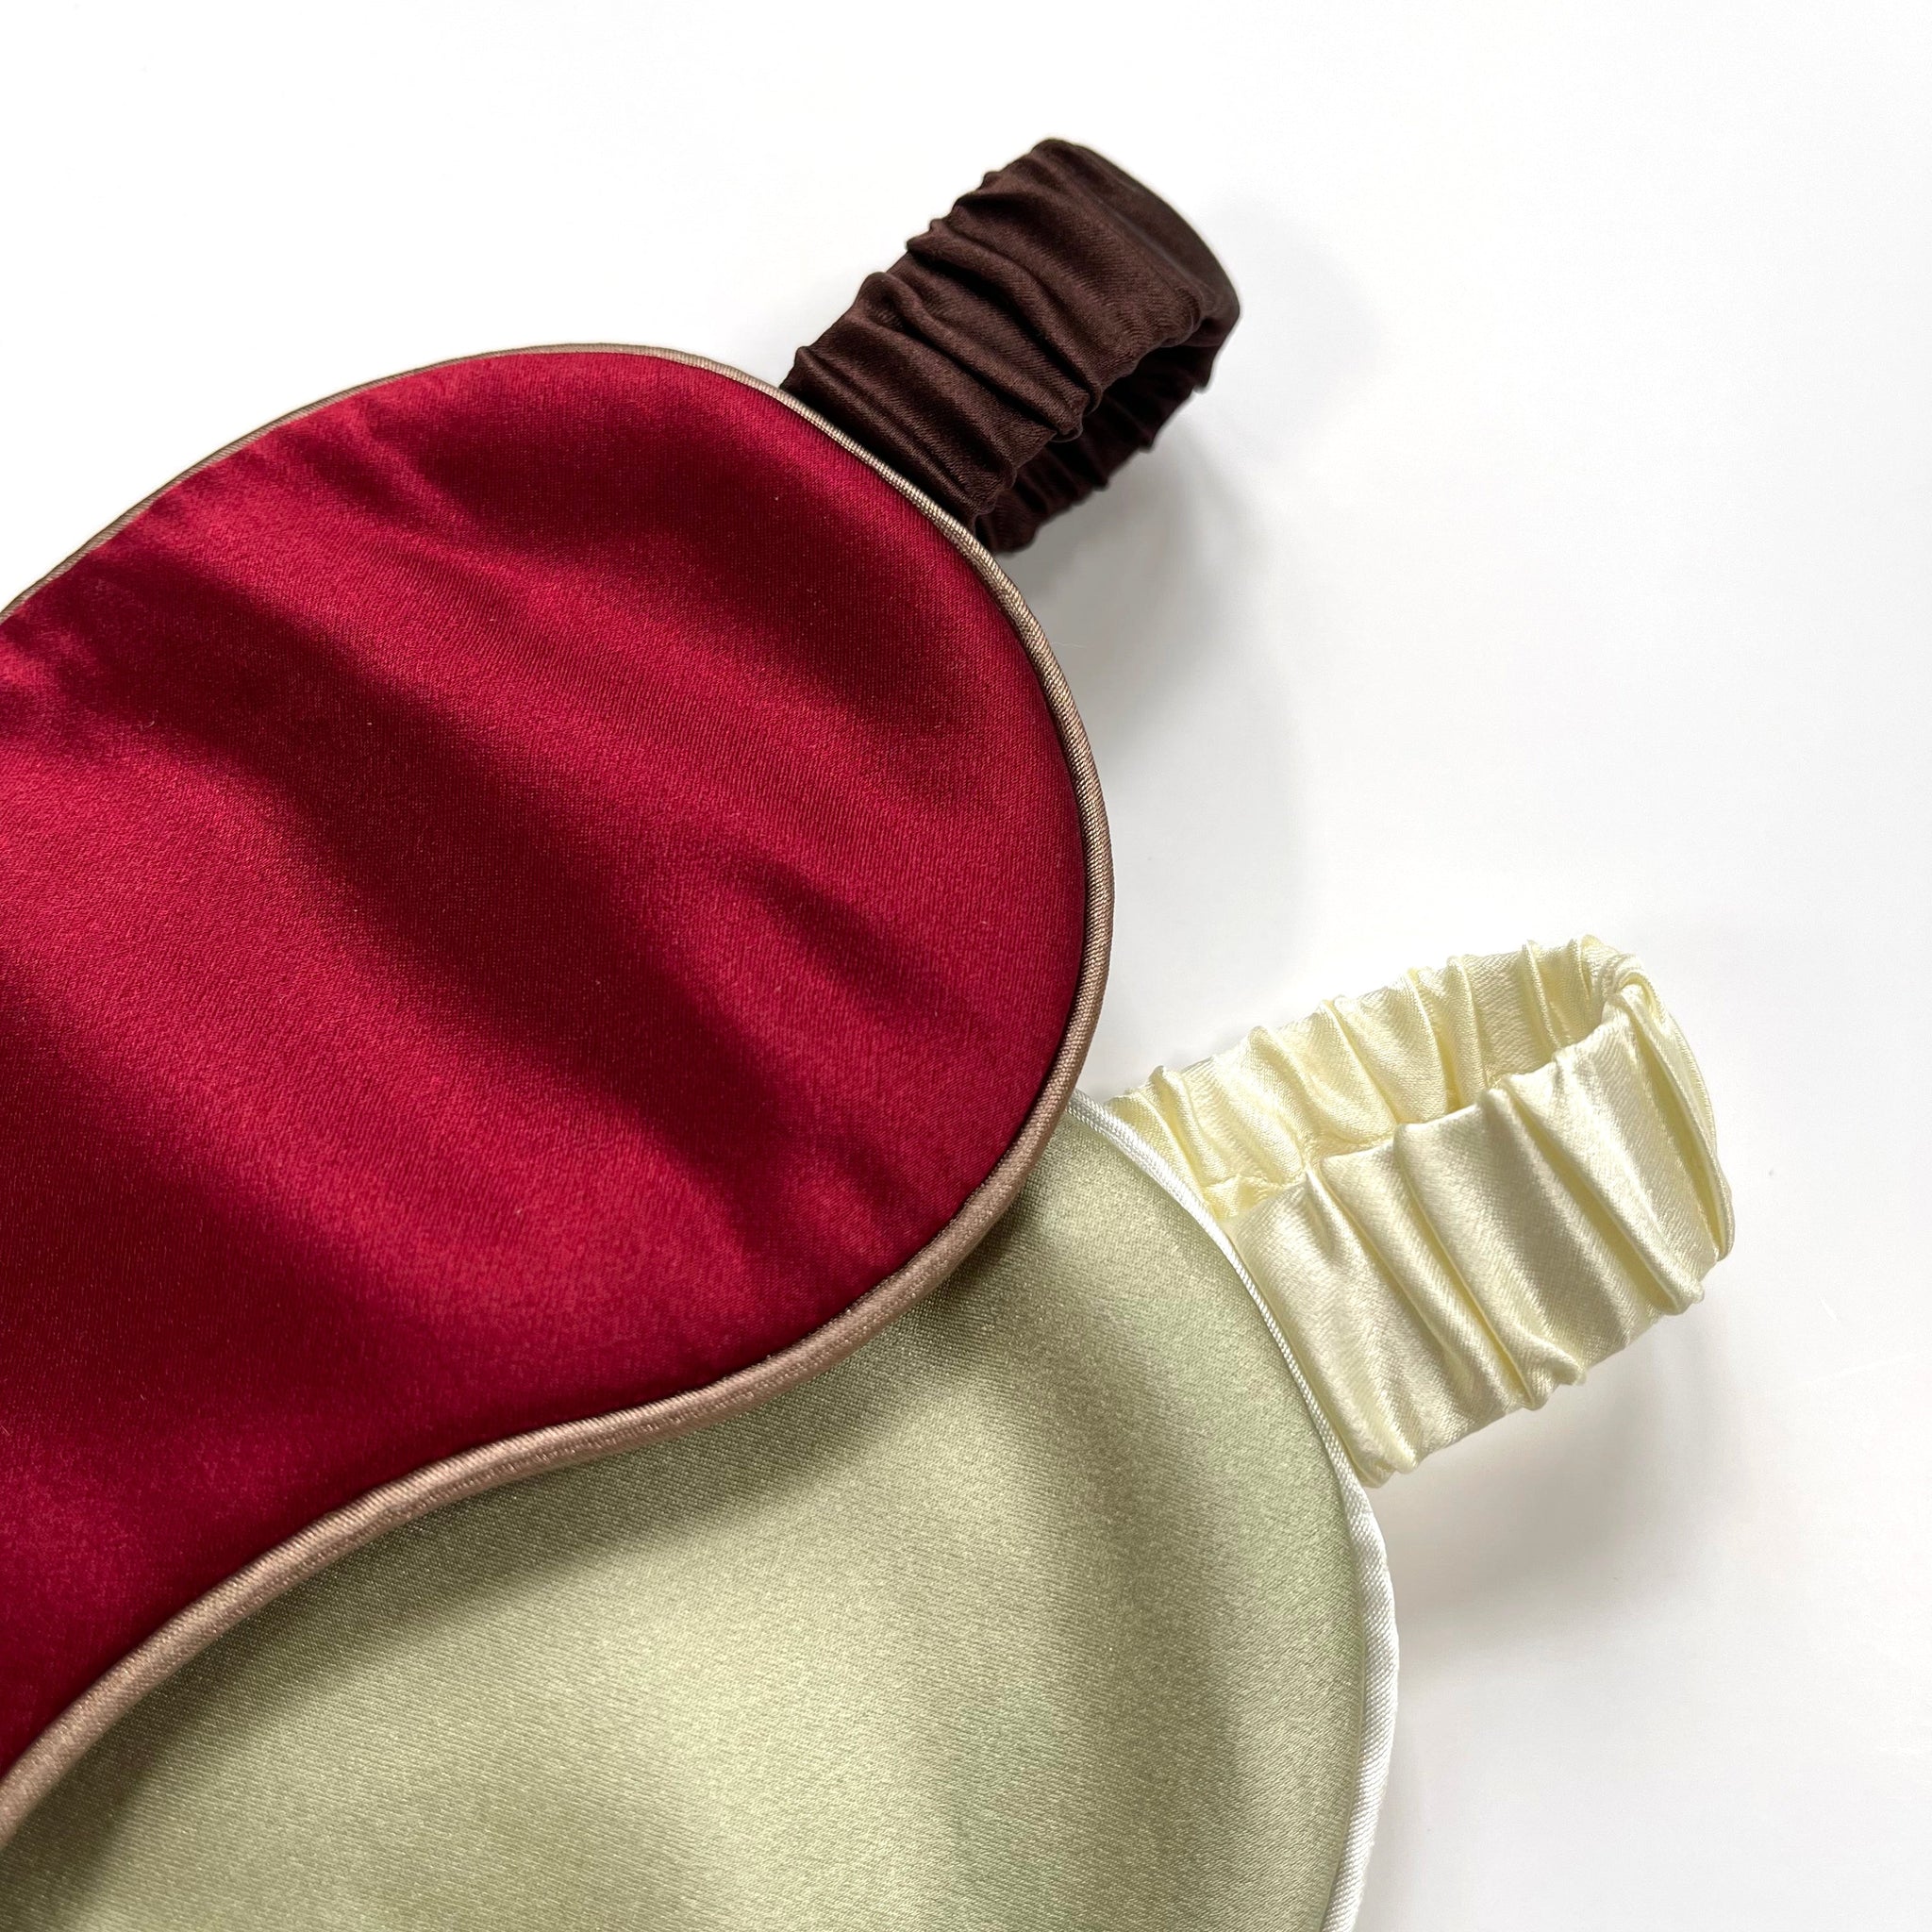 a red silk eye mask with brown strap and a pea green silk eye mask with creamy white strap